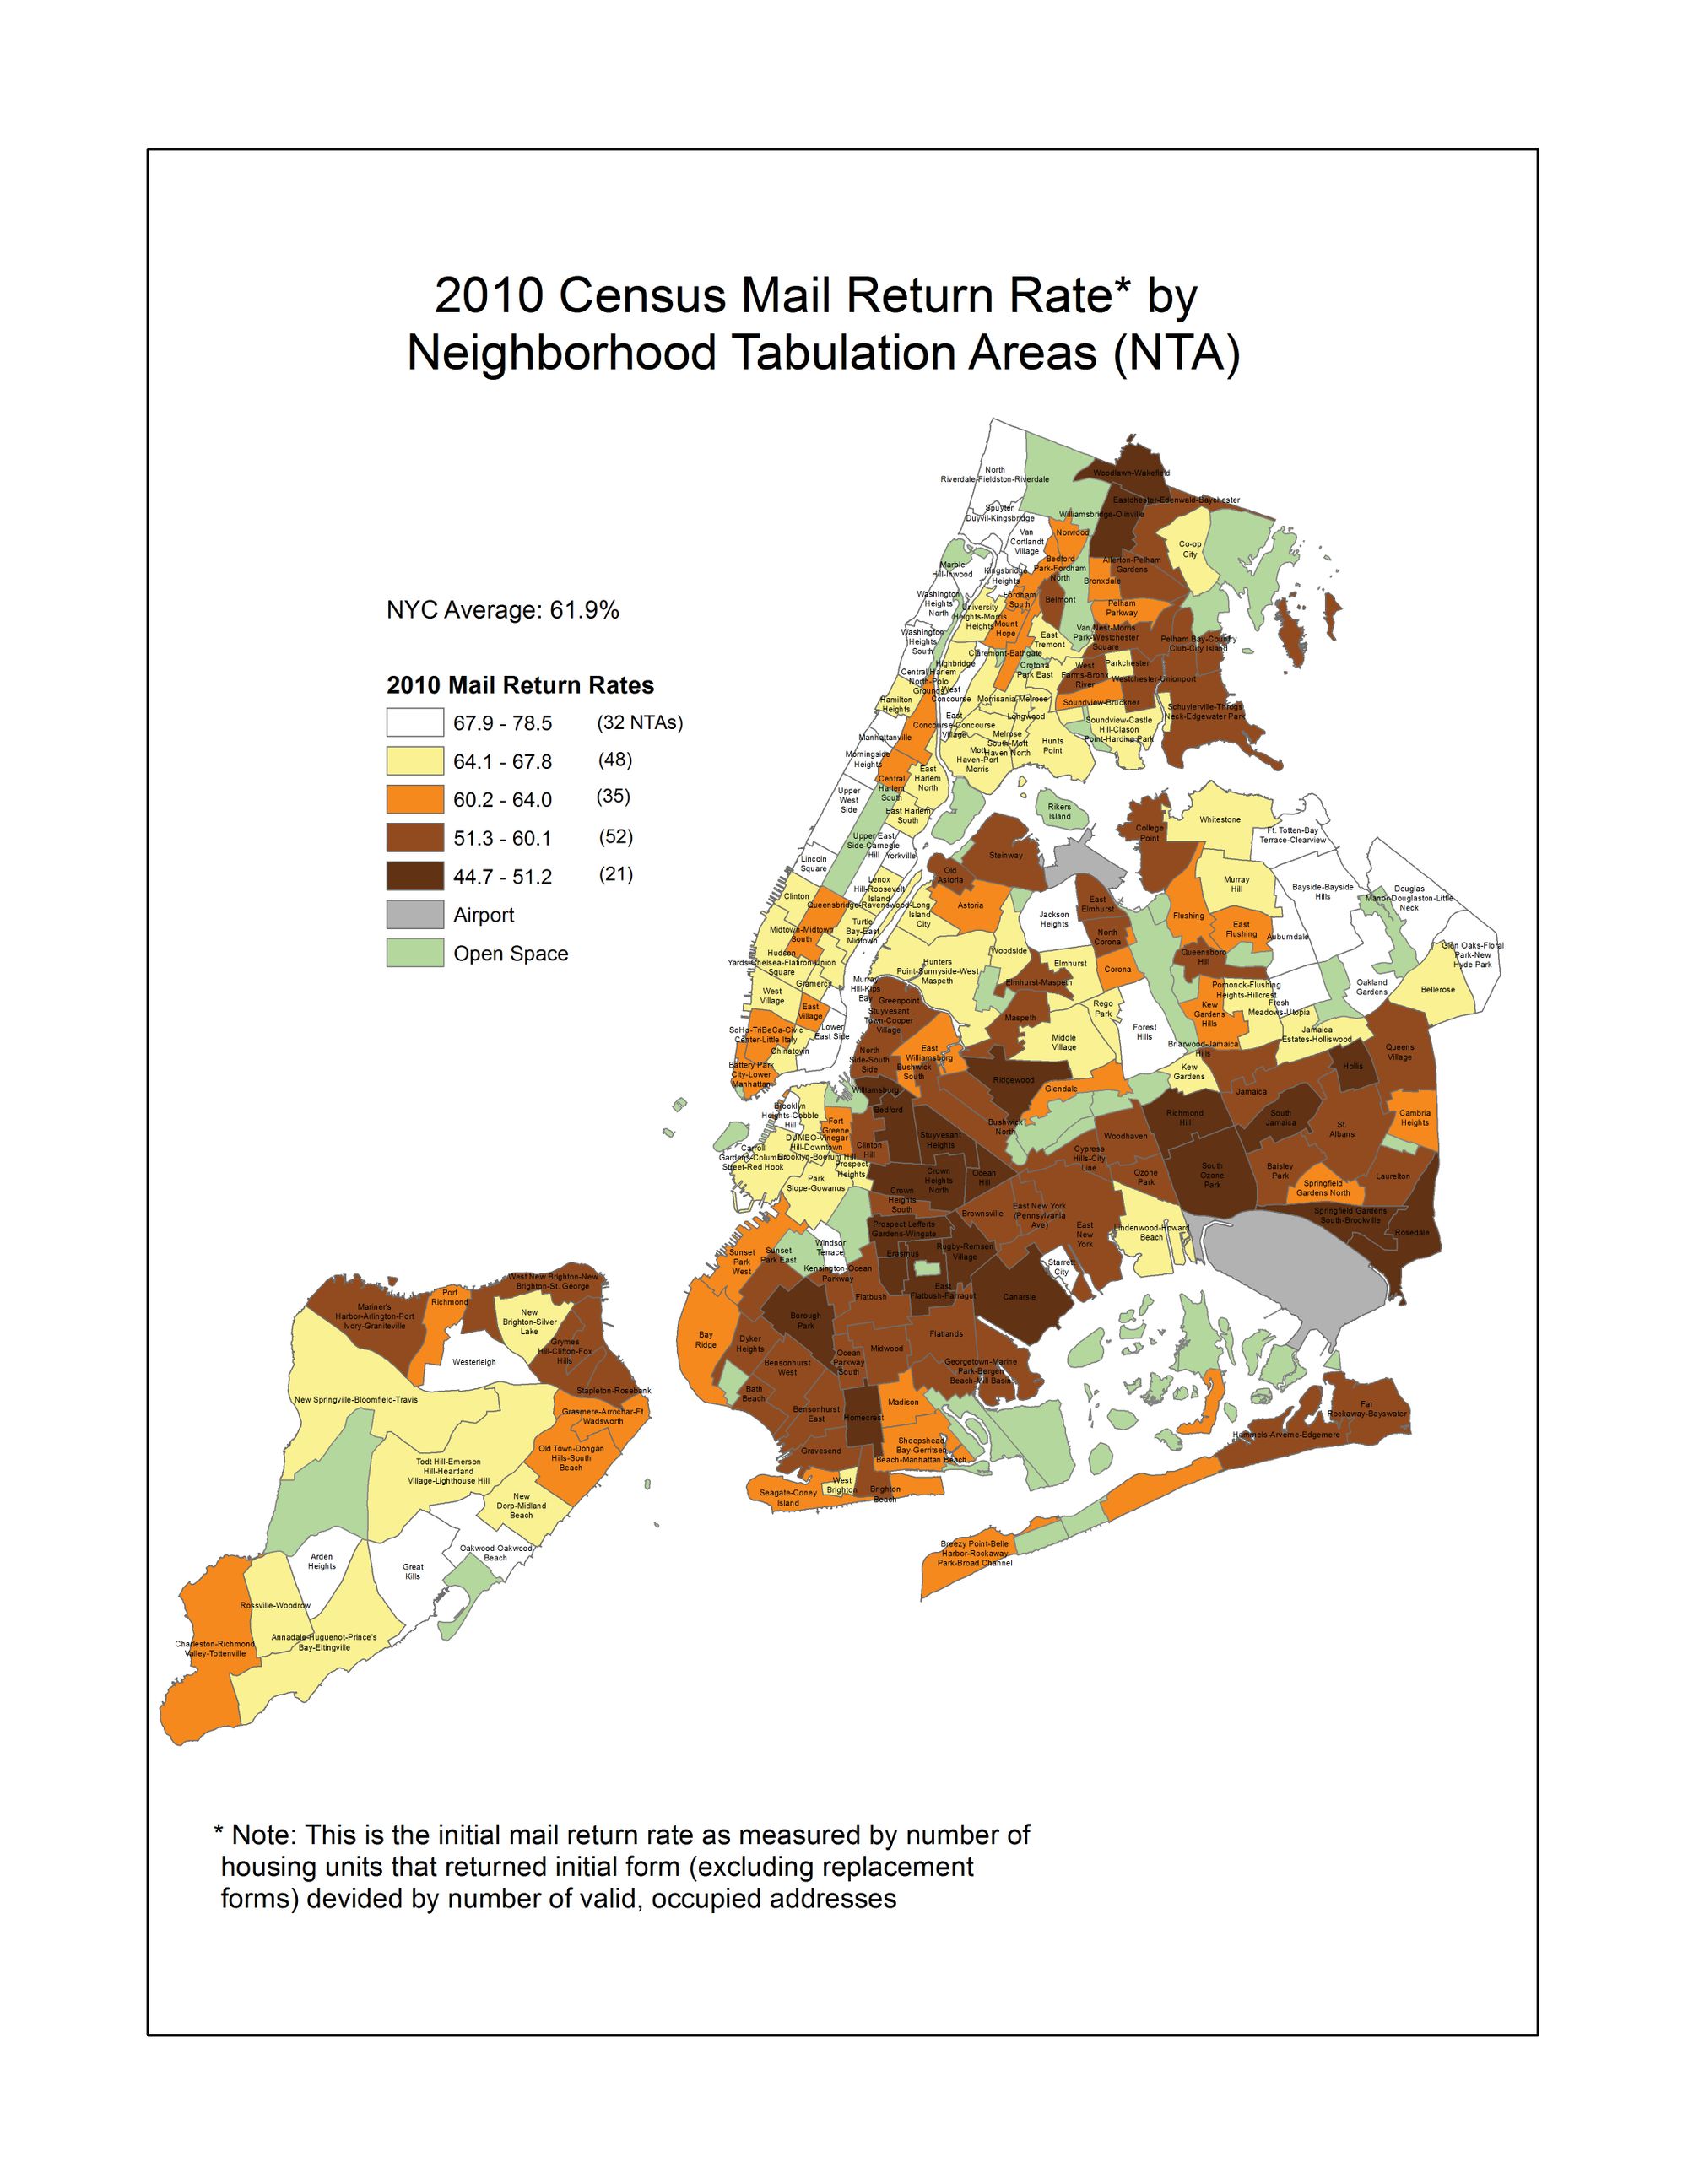 Mail return rate for neighborhoods throughout NYC, according to the 2010 census. (Map: Newmark J-School at CUNY)